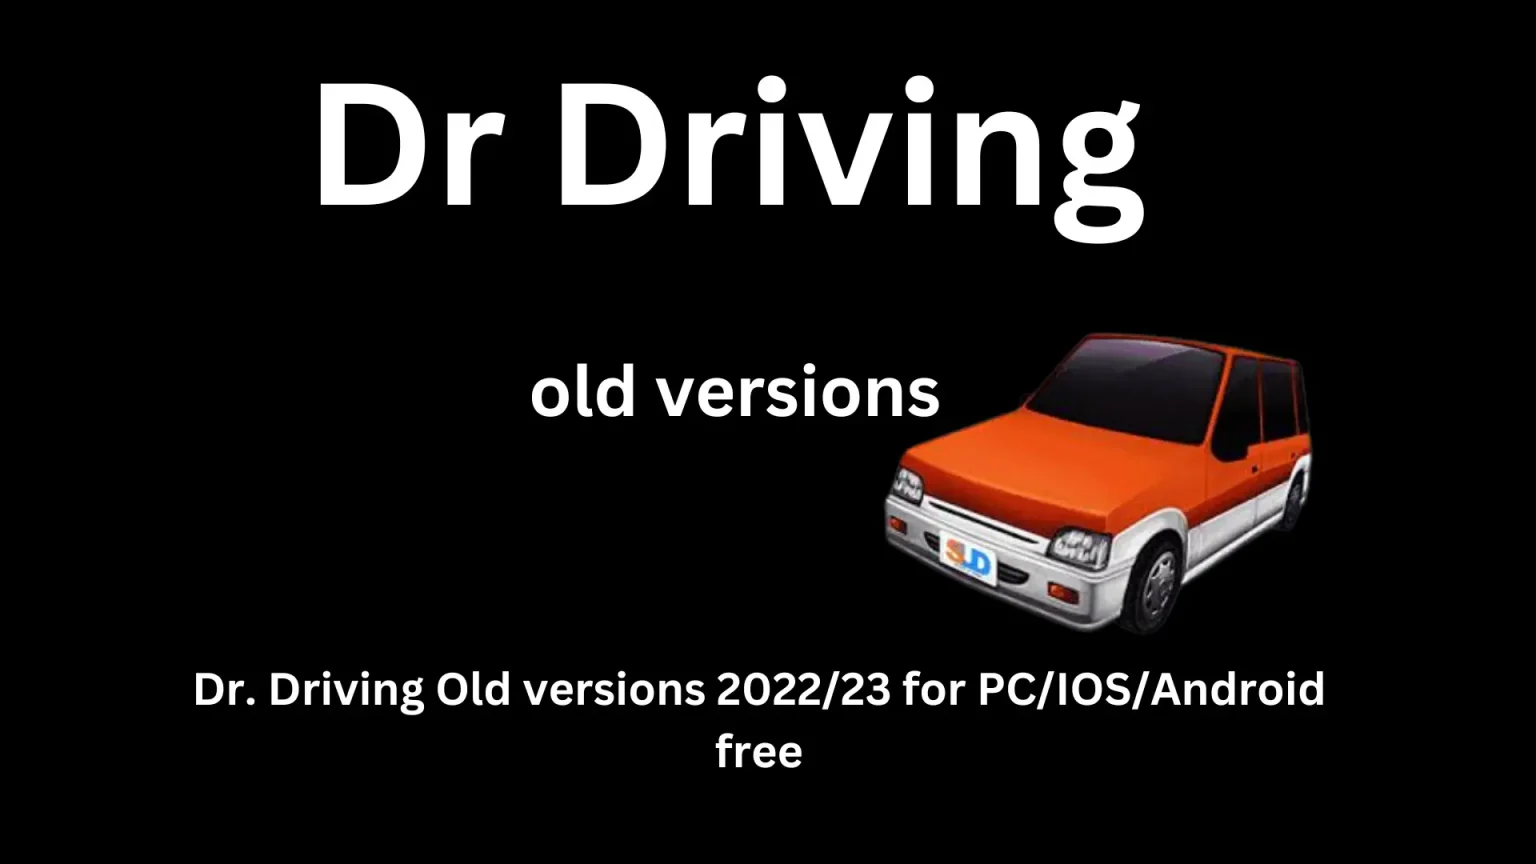 Dr. Driving old